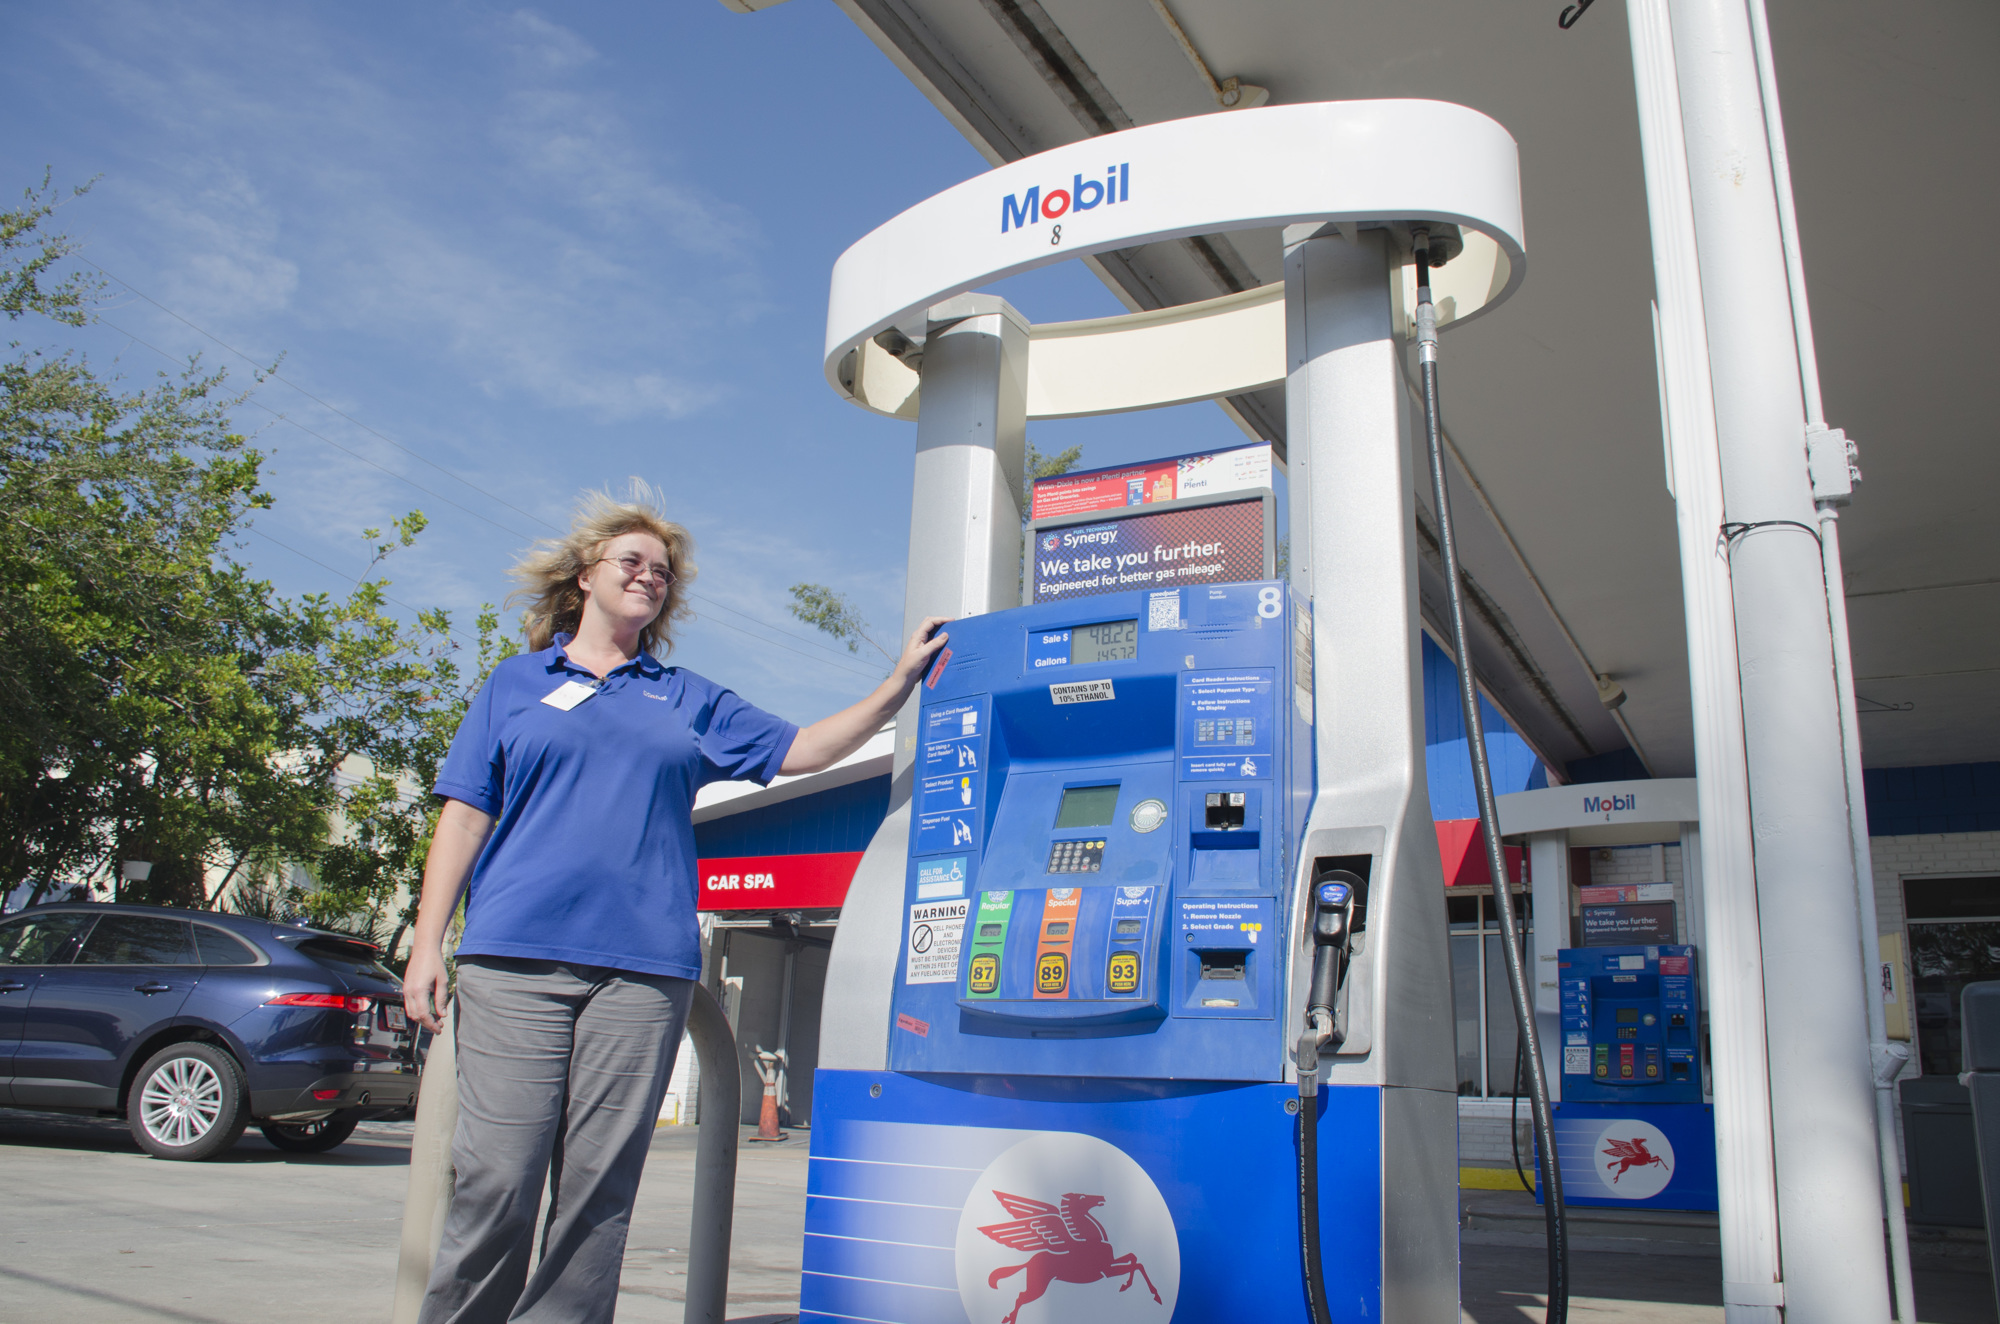 Cindy Dearth, two-year manager at the Longboat Key Mobil Station, found evidence a pump had been tampered with.